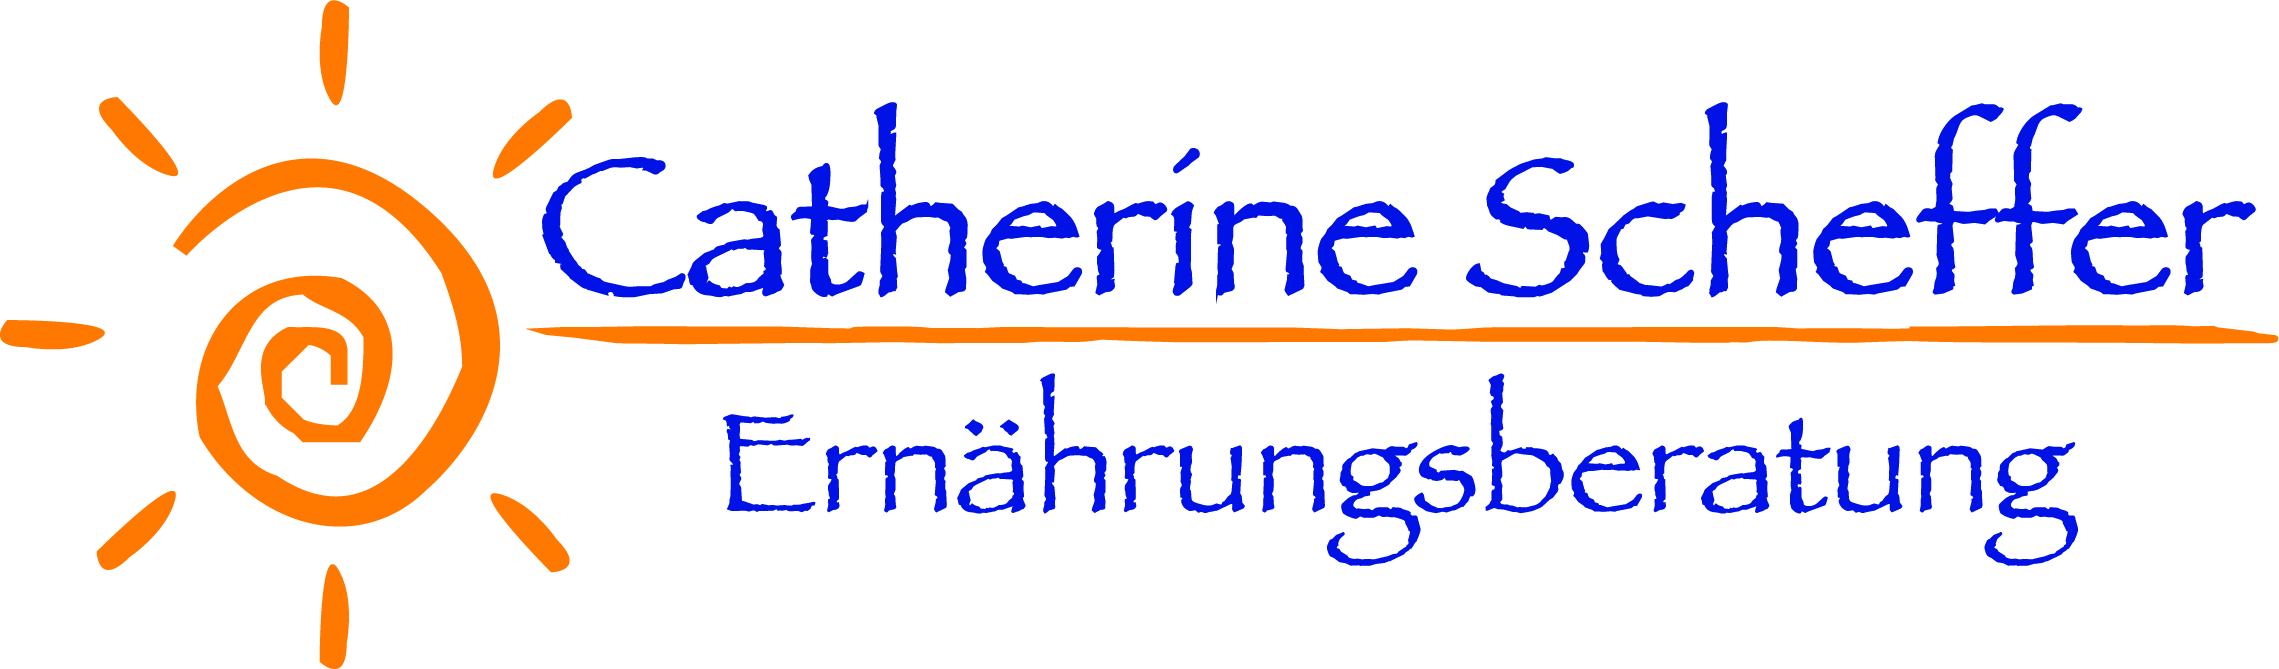 Ernährungsberatung Catherine Scheffer Functional Nutrition Counselling